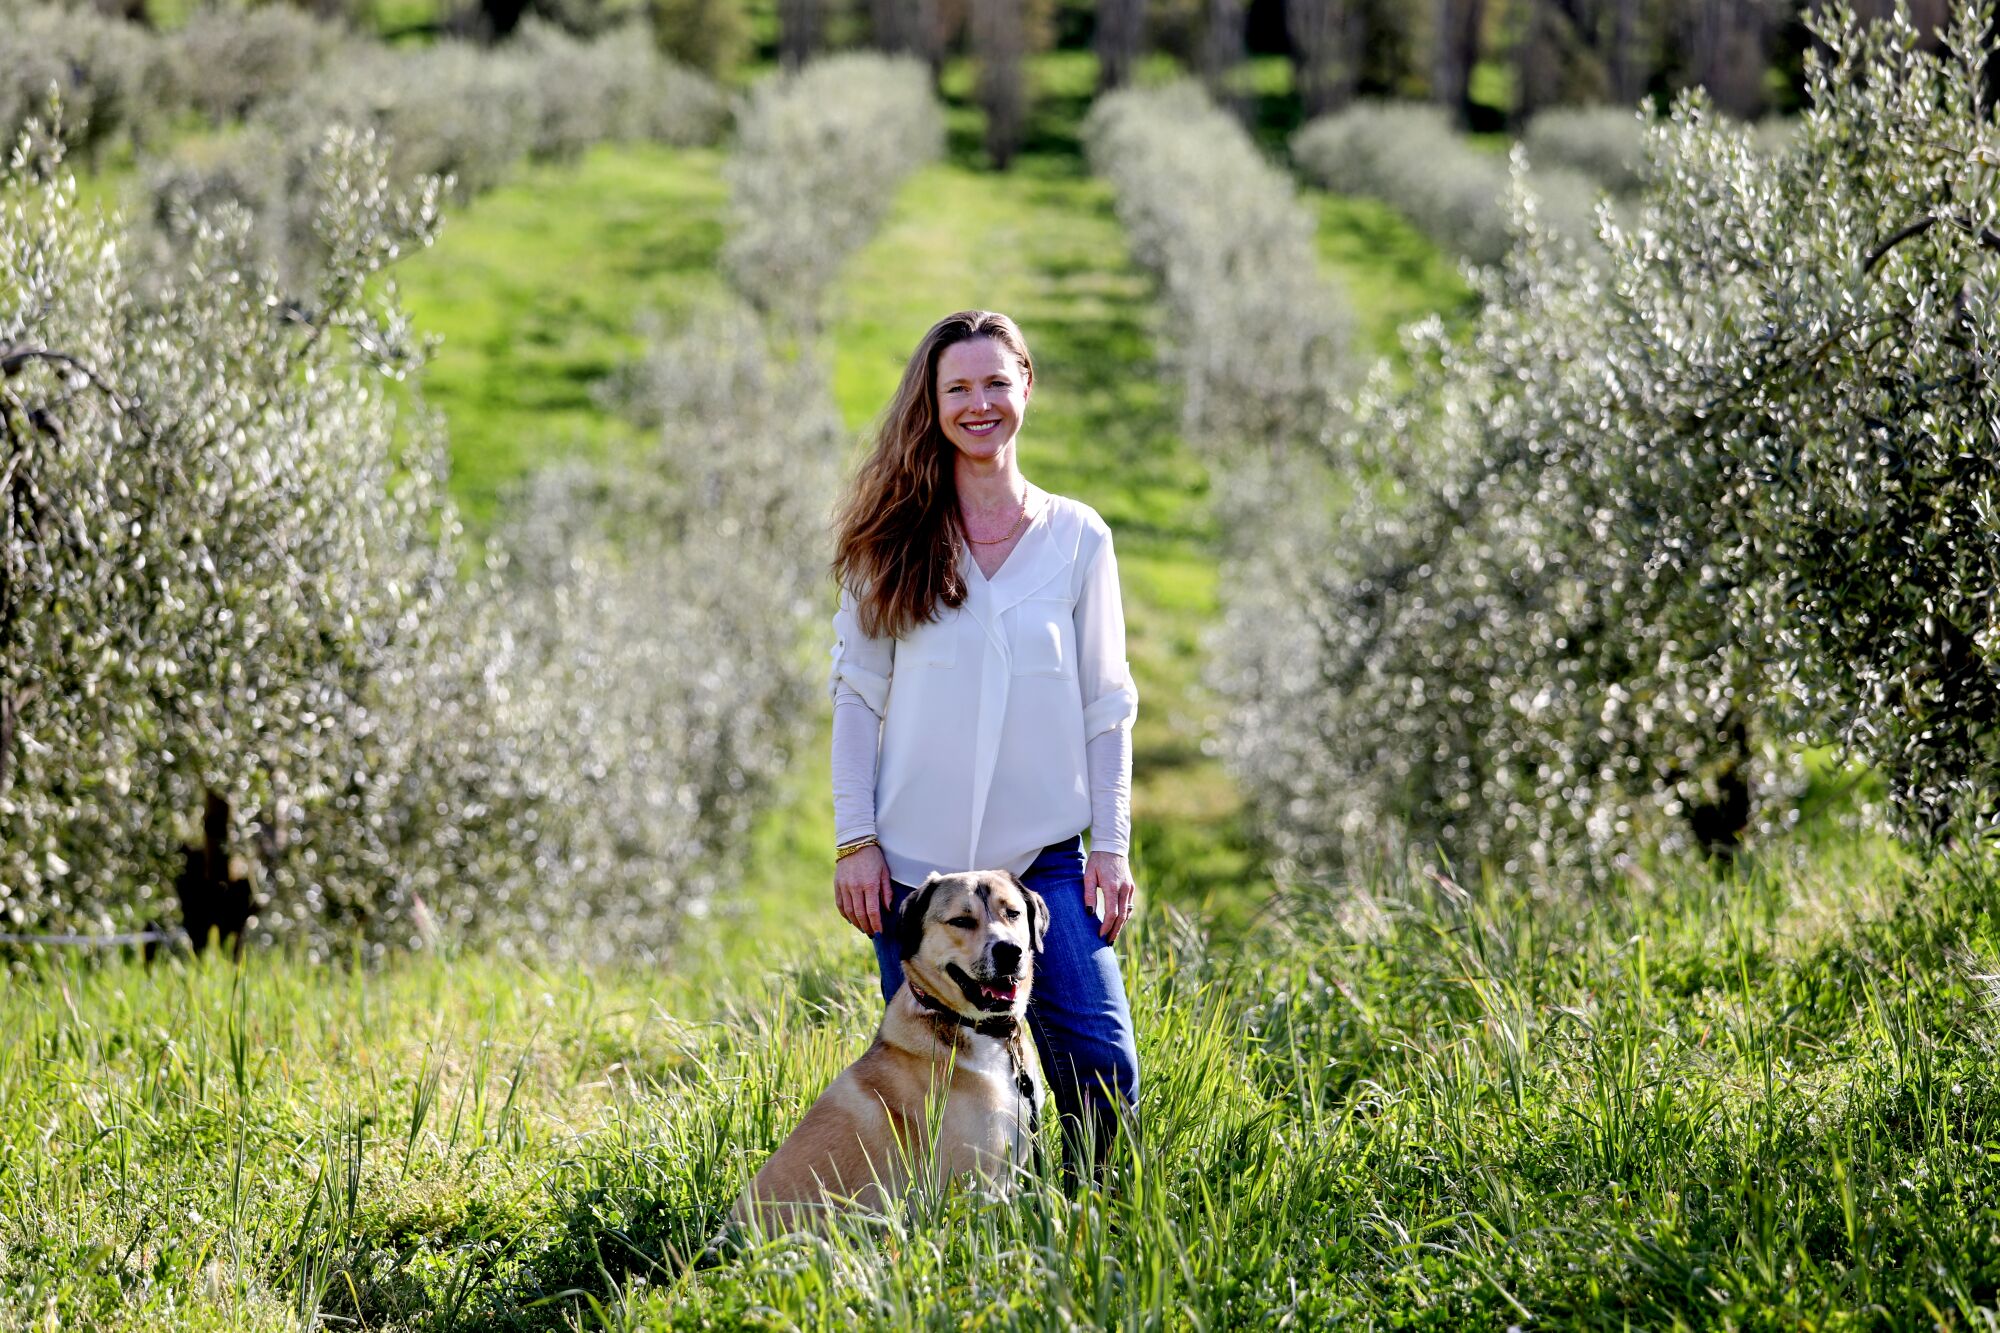 Samantha Dorsey stands with a dog in an olive grove.